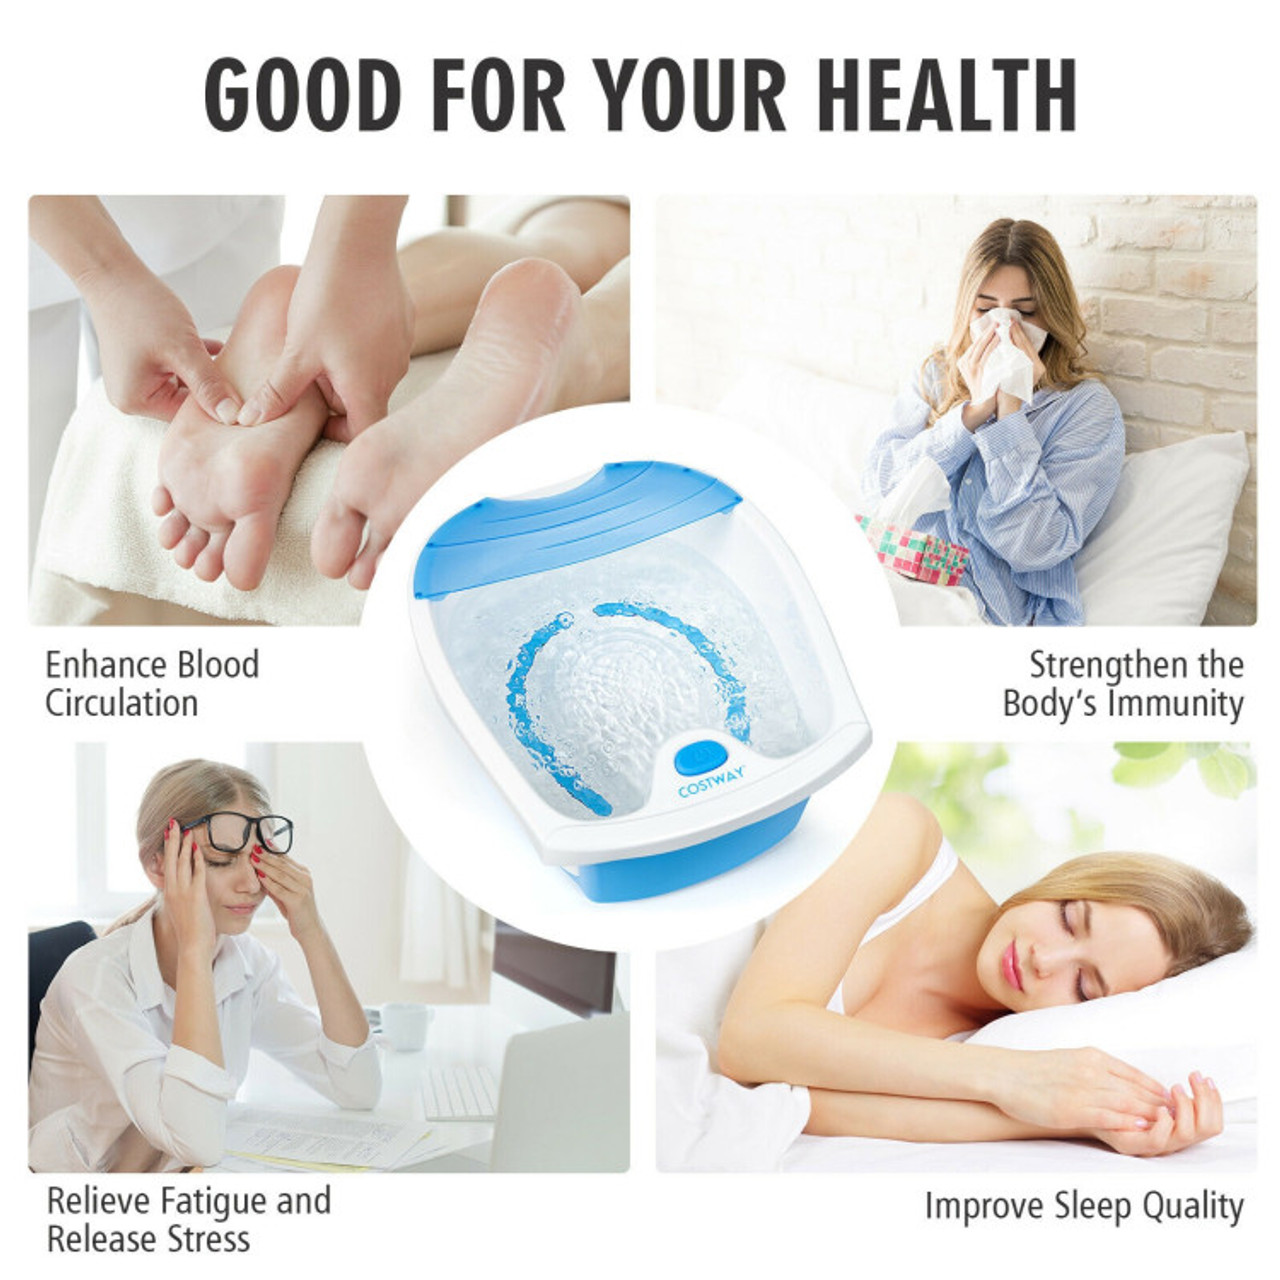 Foot Spa Bath with Smooth Bubble Massage Nodes & Arch Toe-Touch Control product image